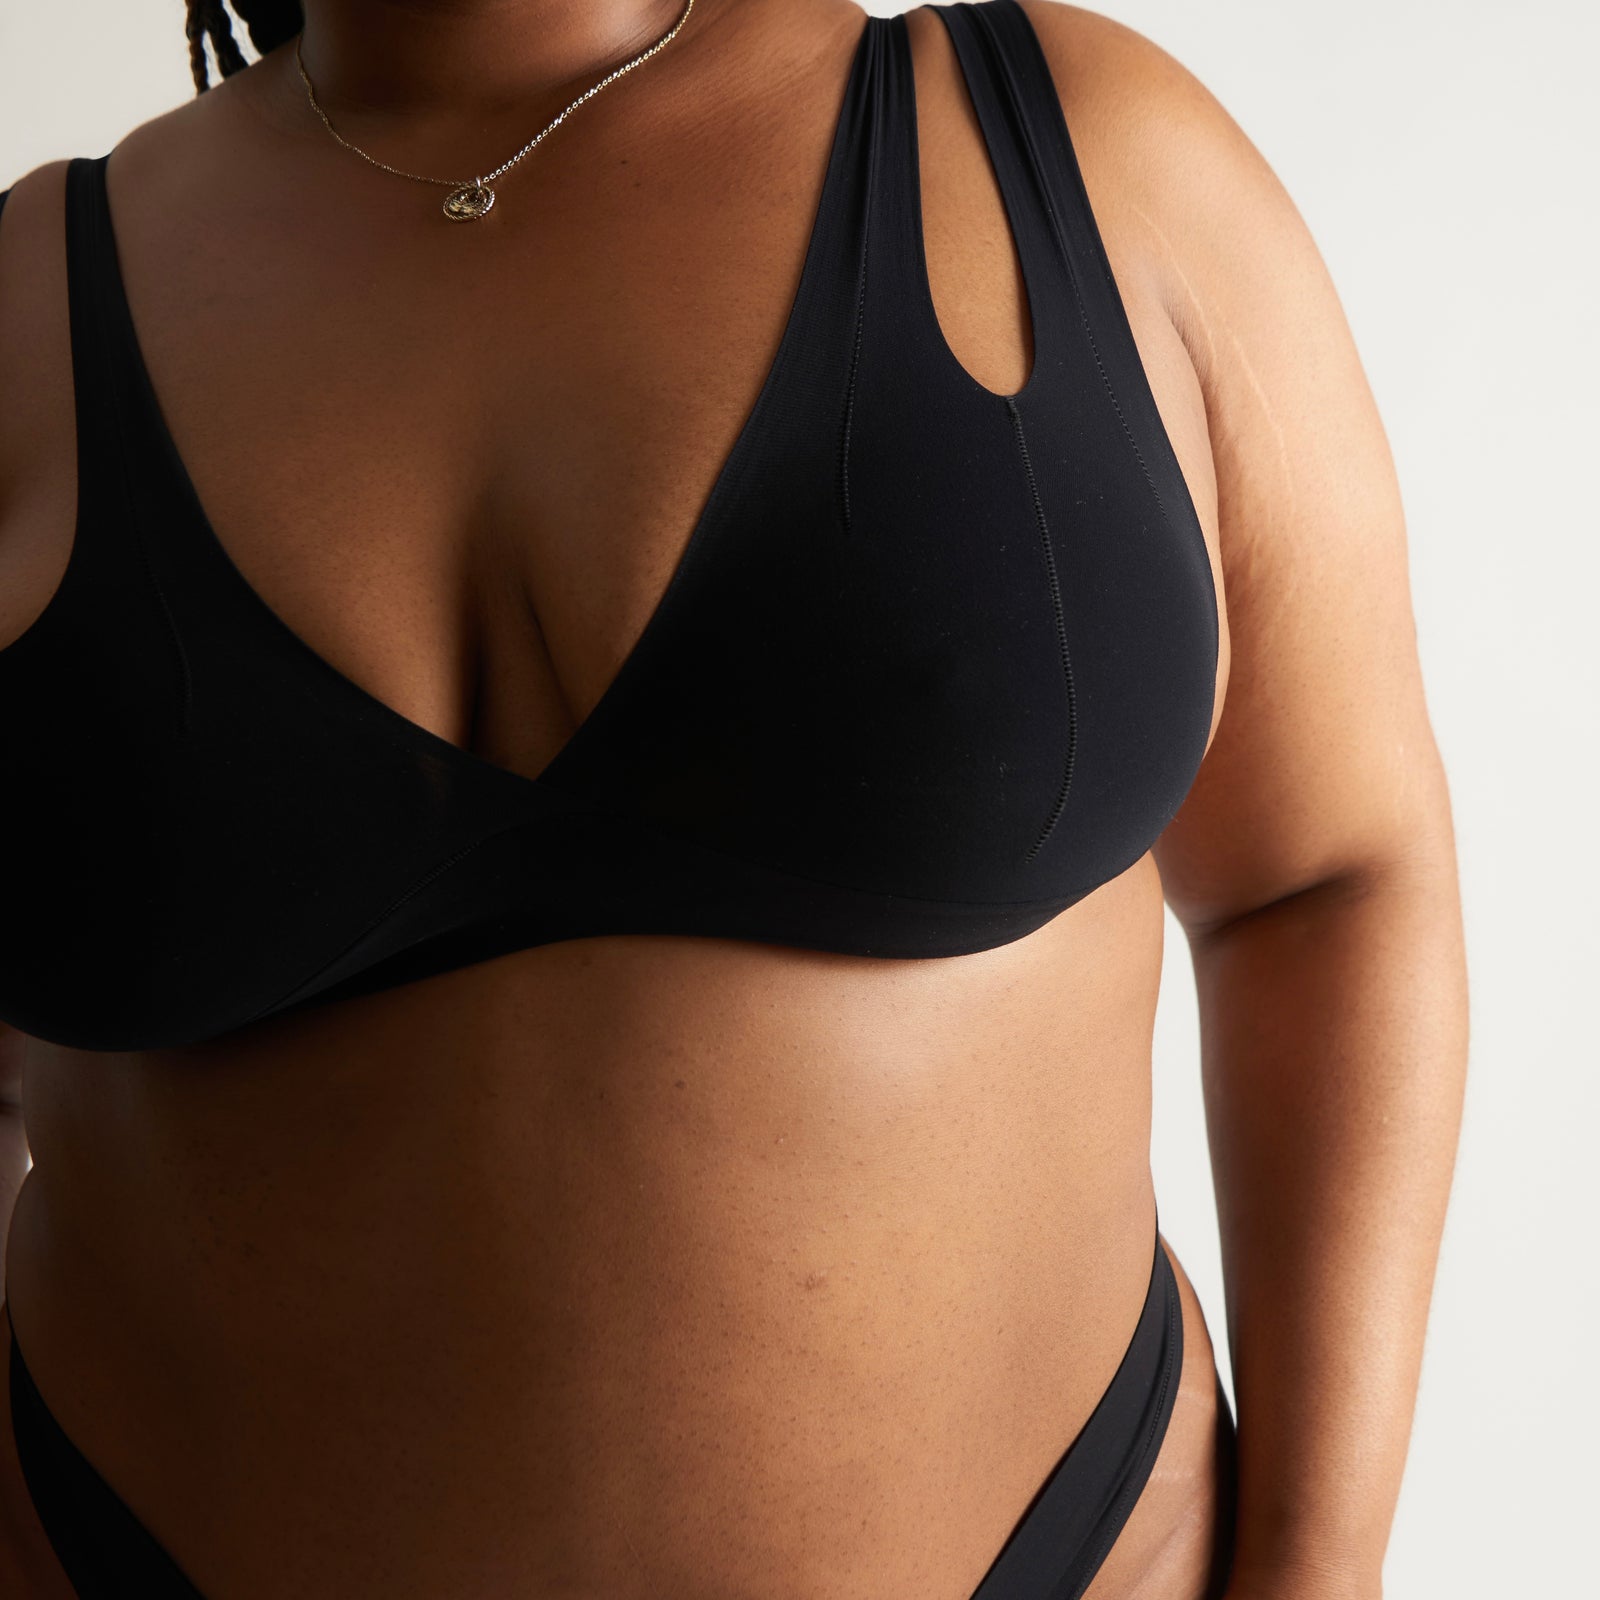 Nuudii System  The Option Between Bra and Braless